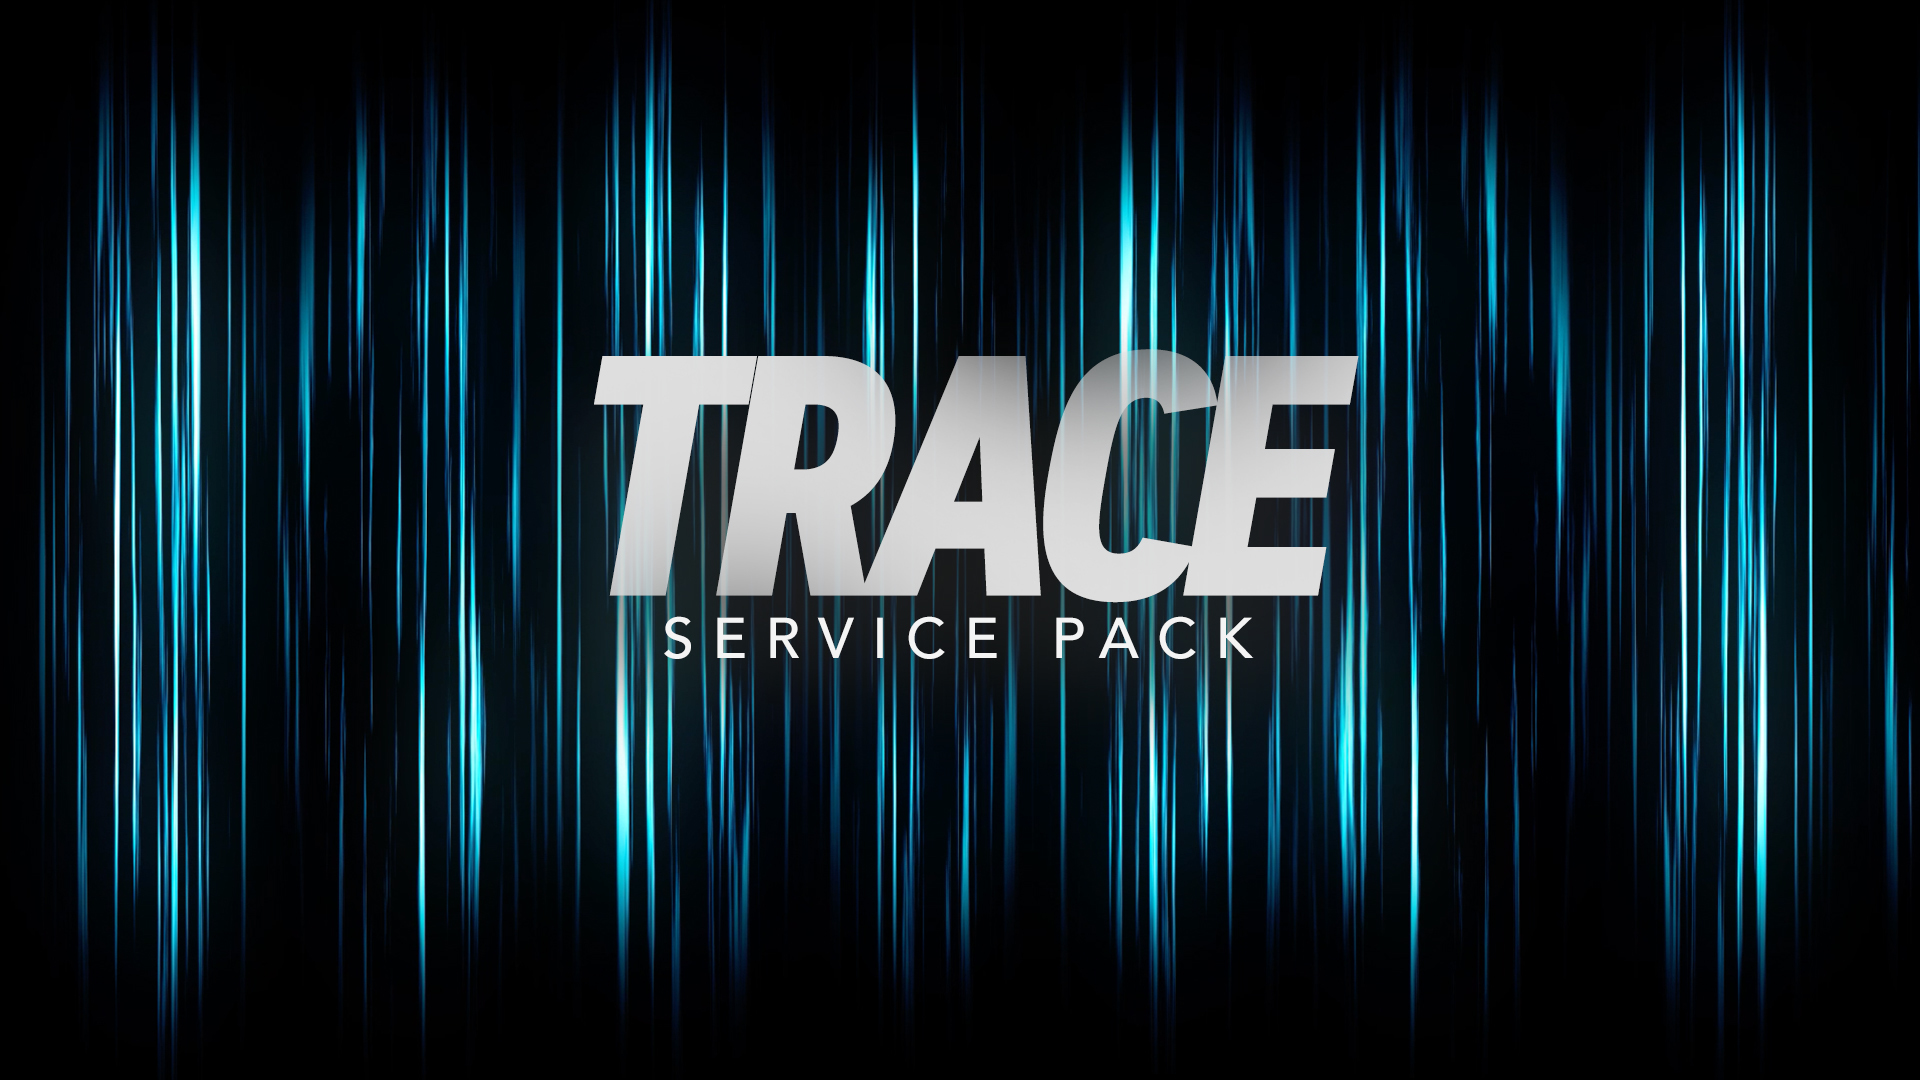 Trace Service Pack